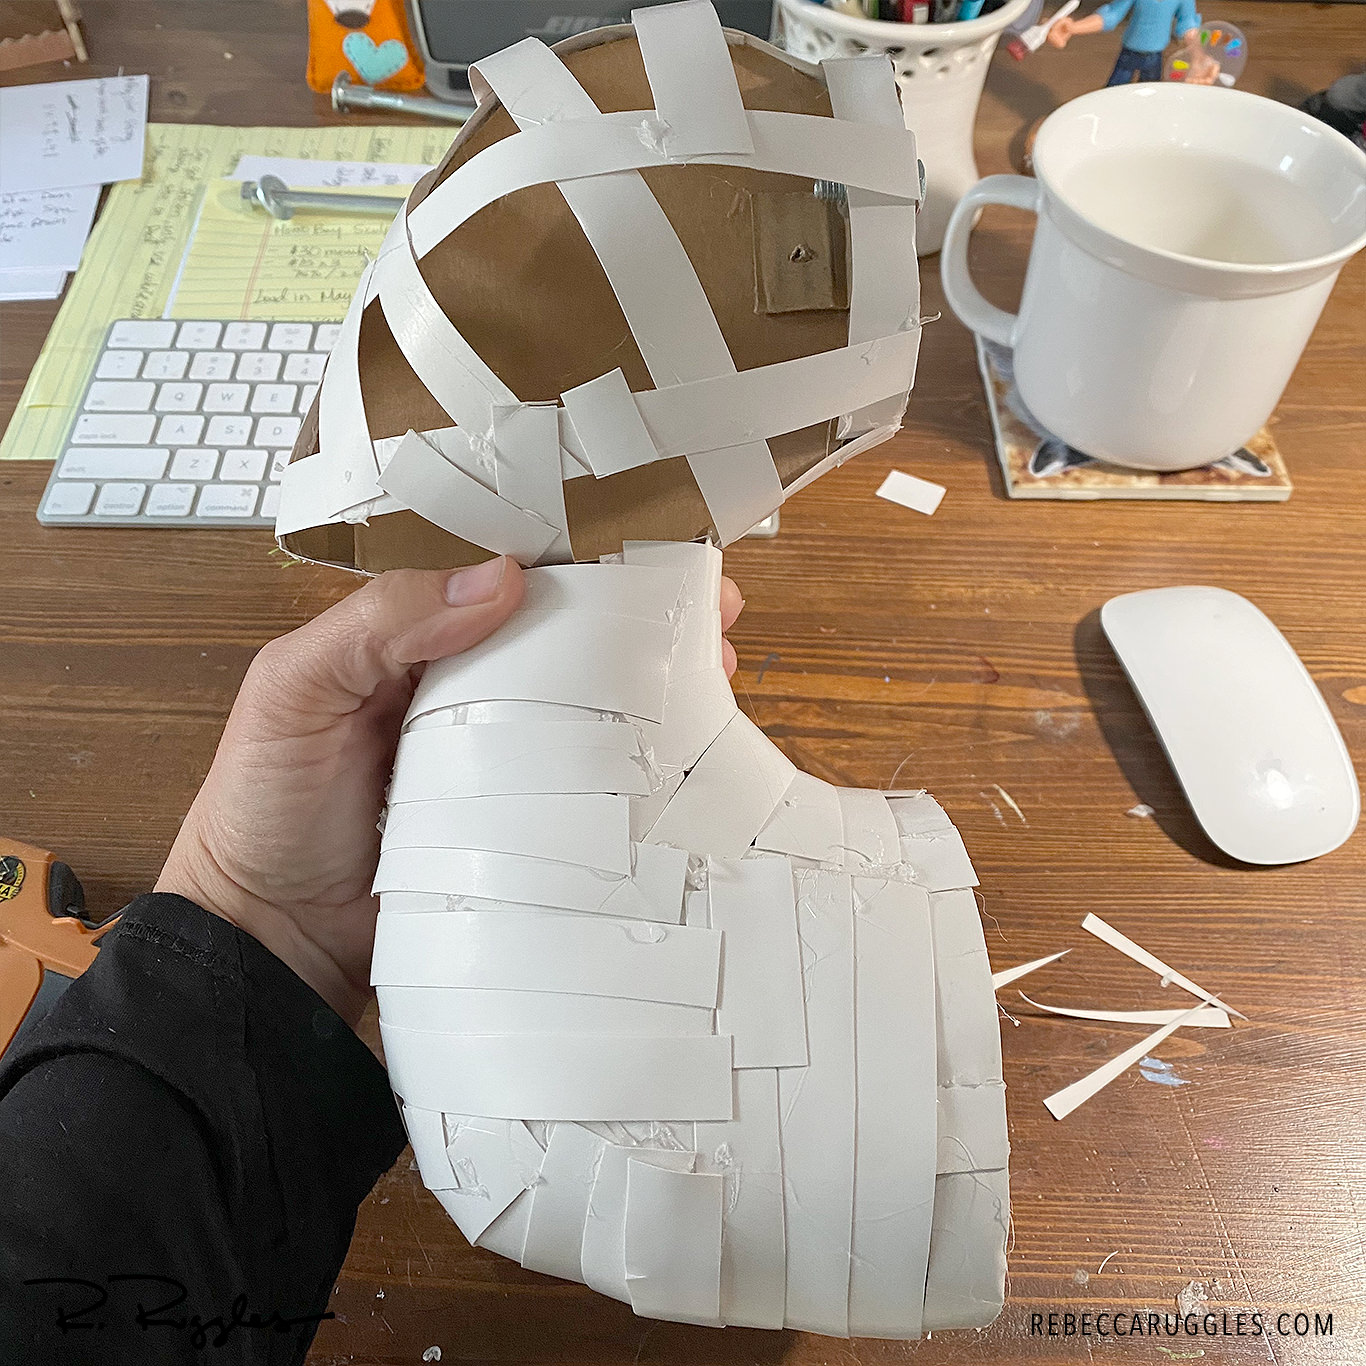 Side view of the early bird armature built out of cardboard by artist Rebecca Ruggles.